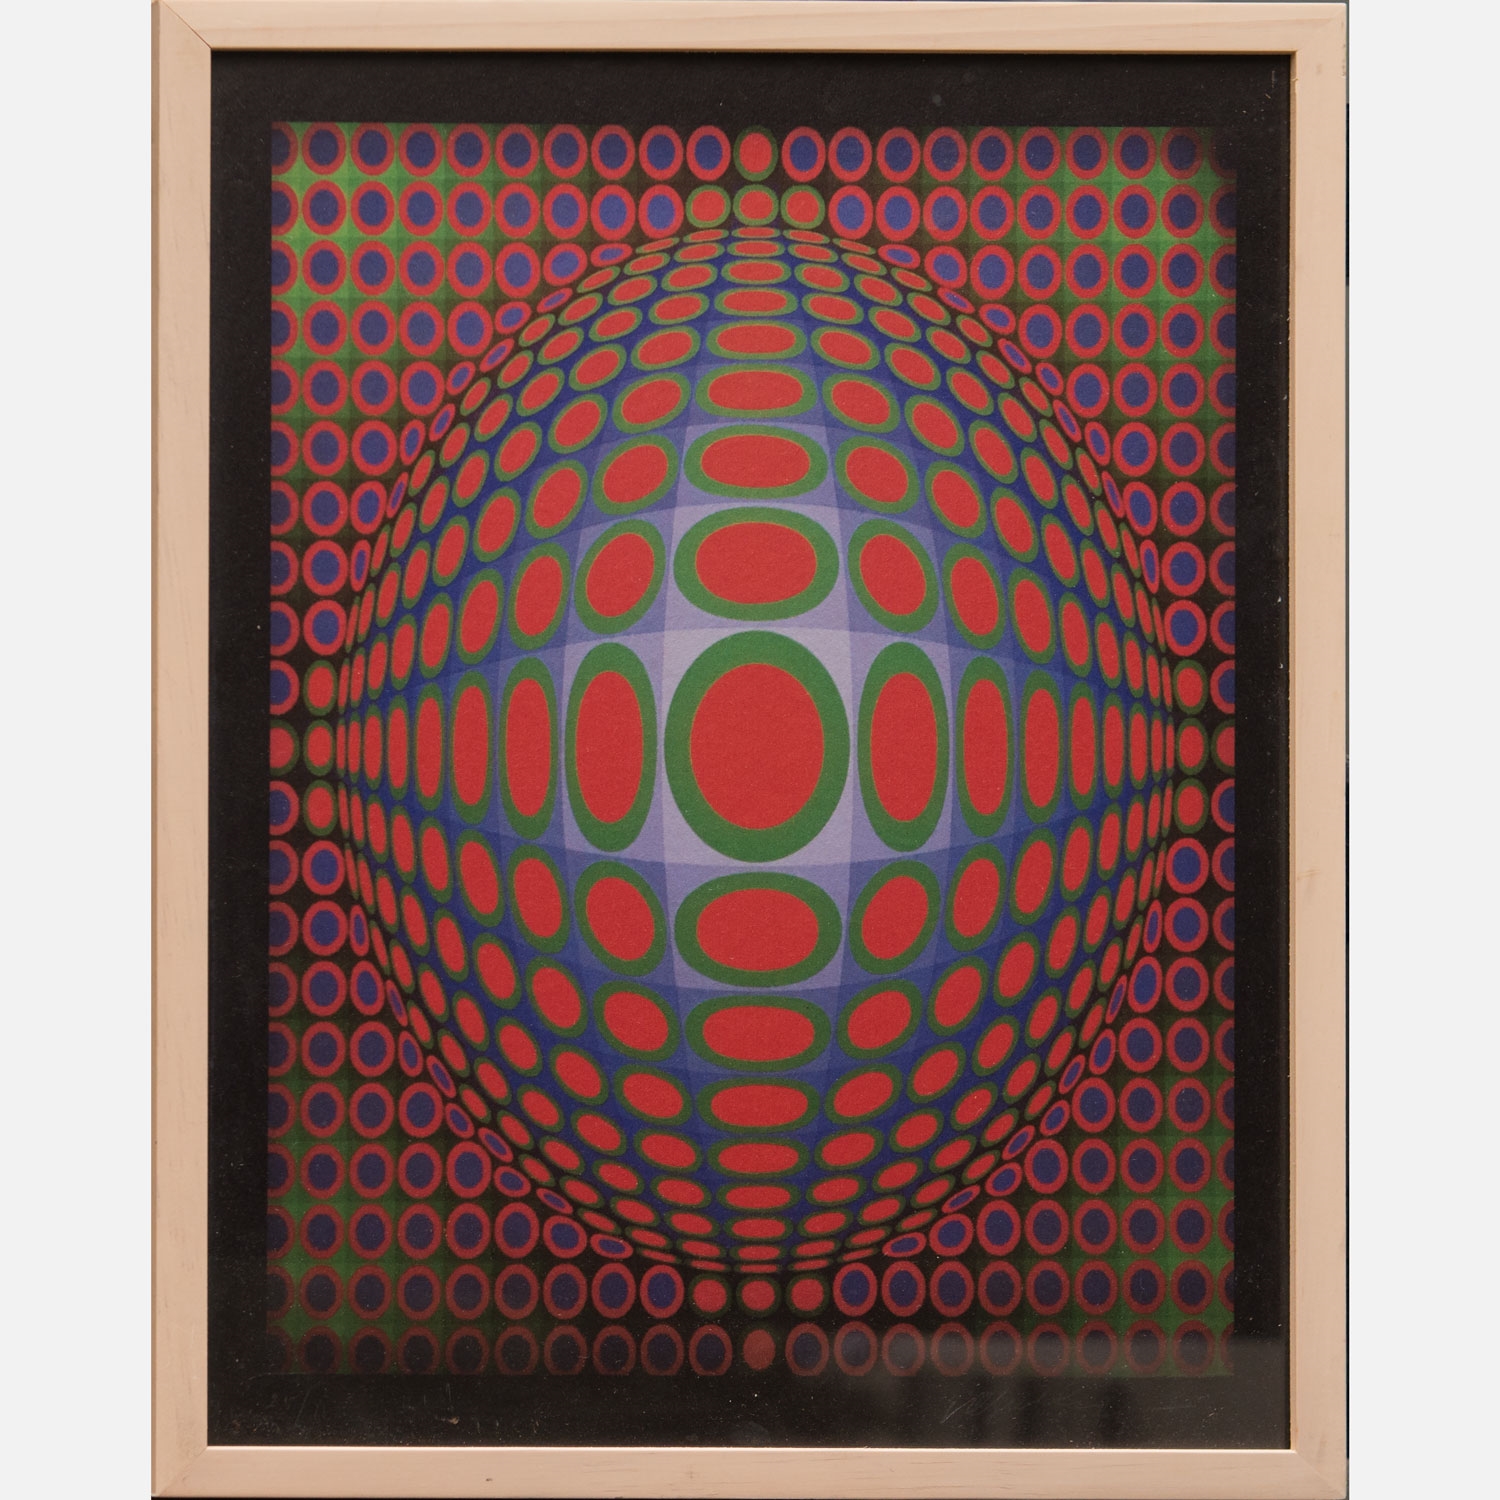 composition 6 by, Victor VASARELY, buy art online